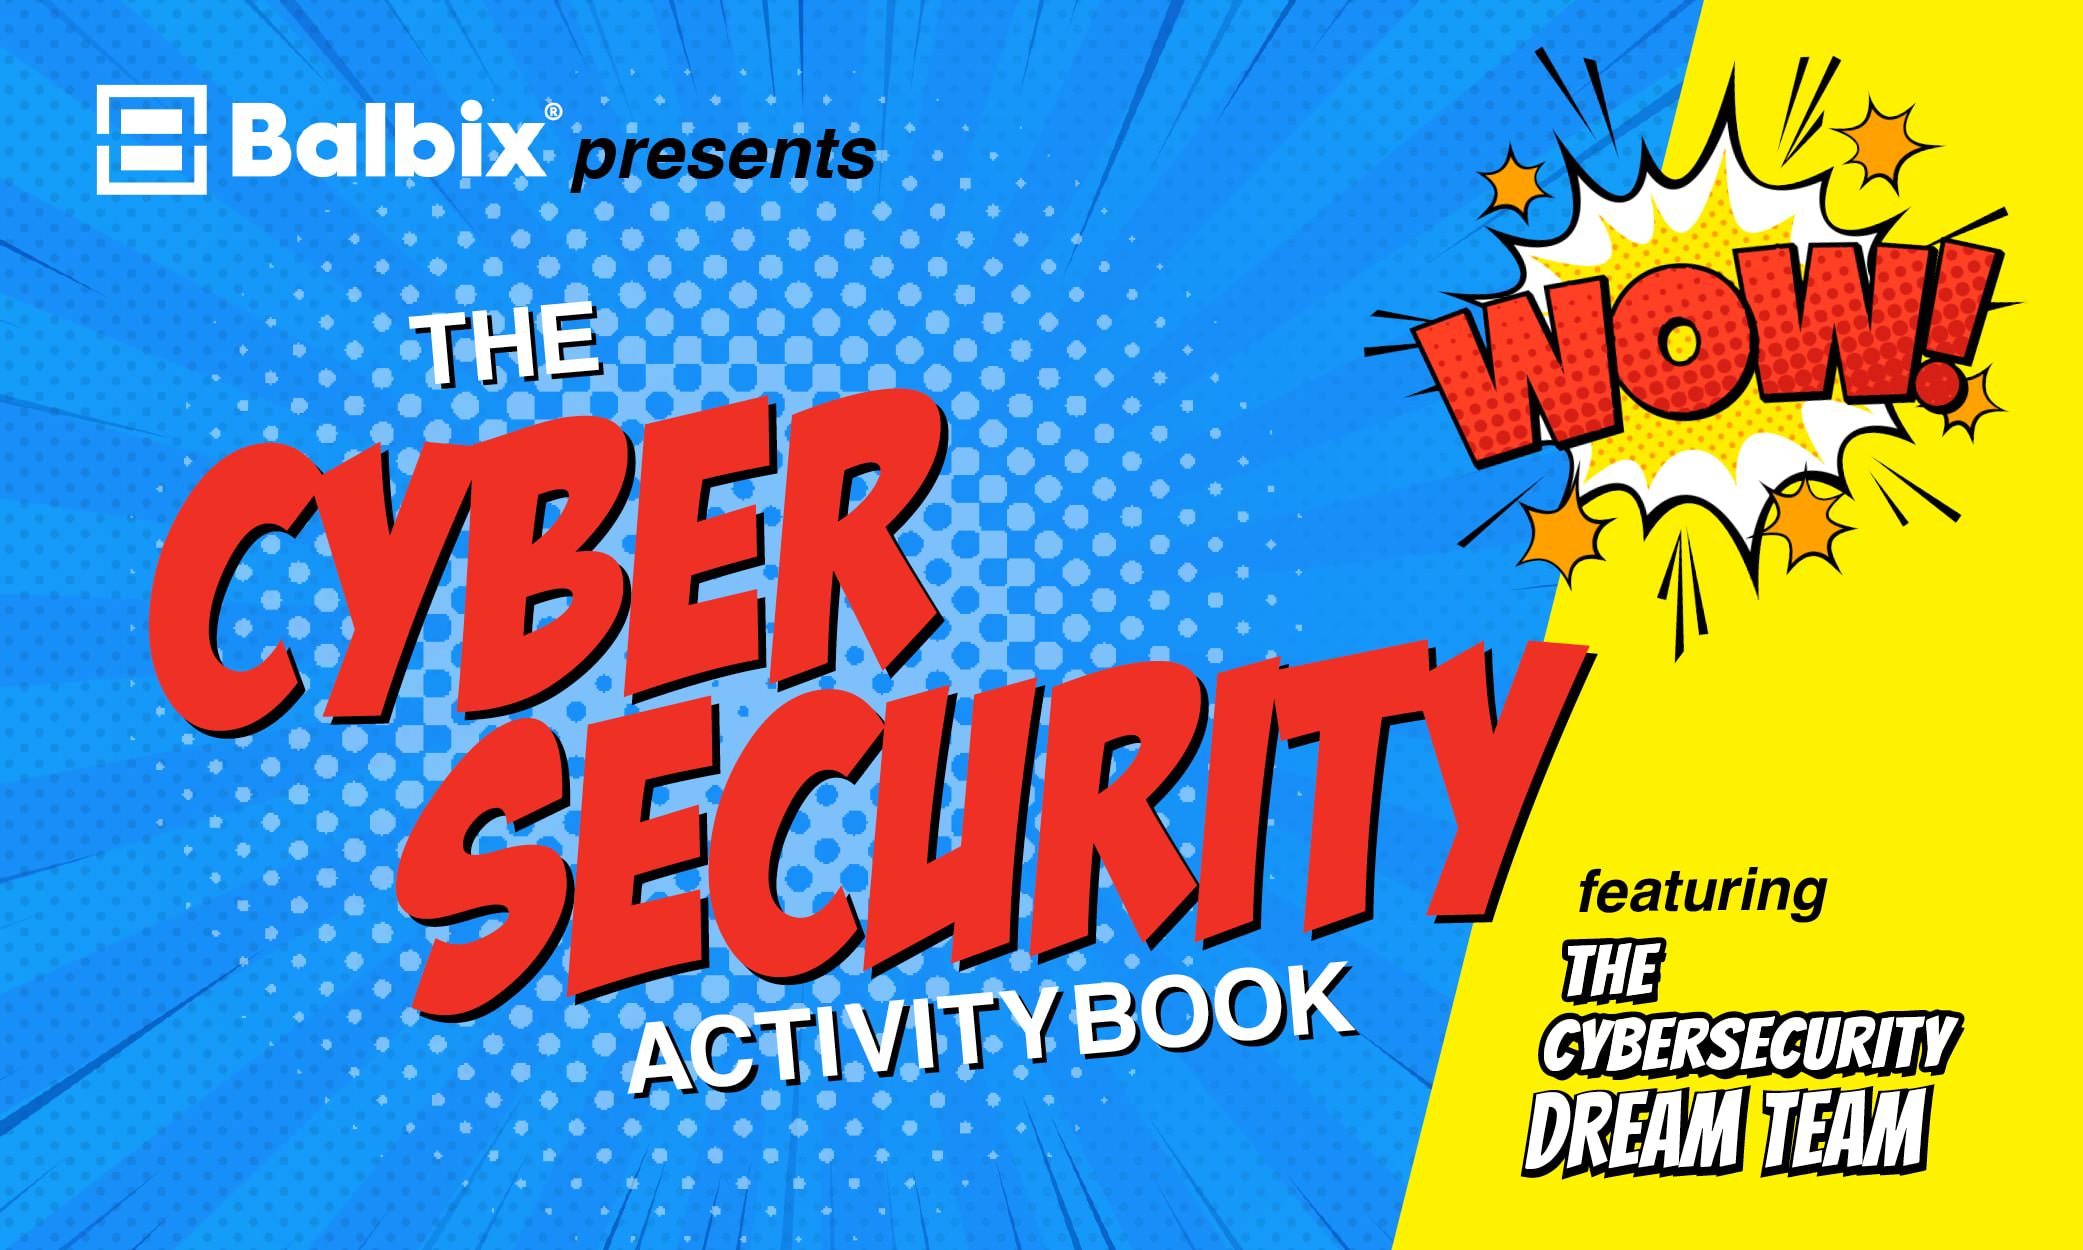 Cybersecurity Activity Book for Kids